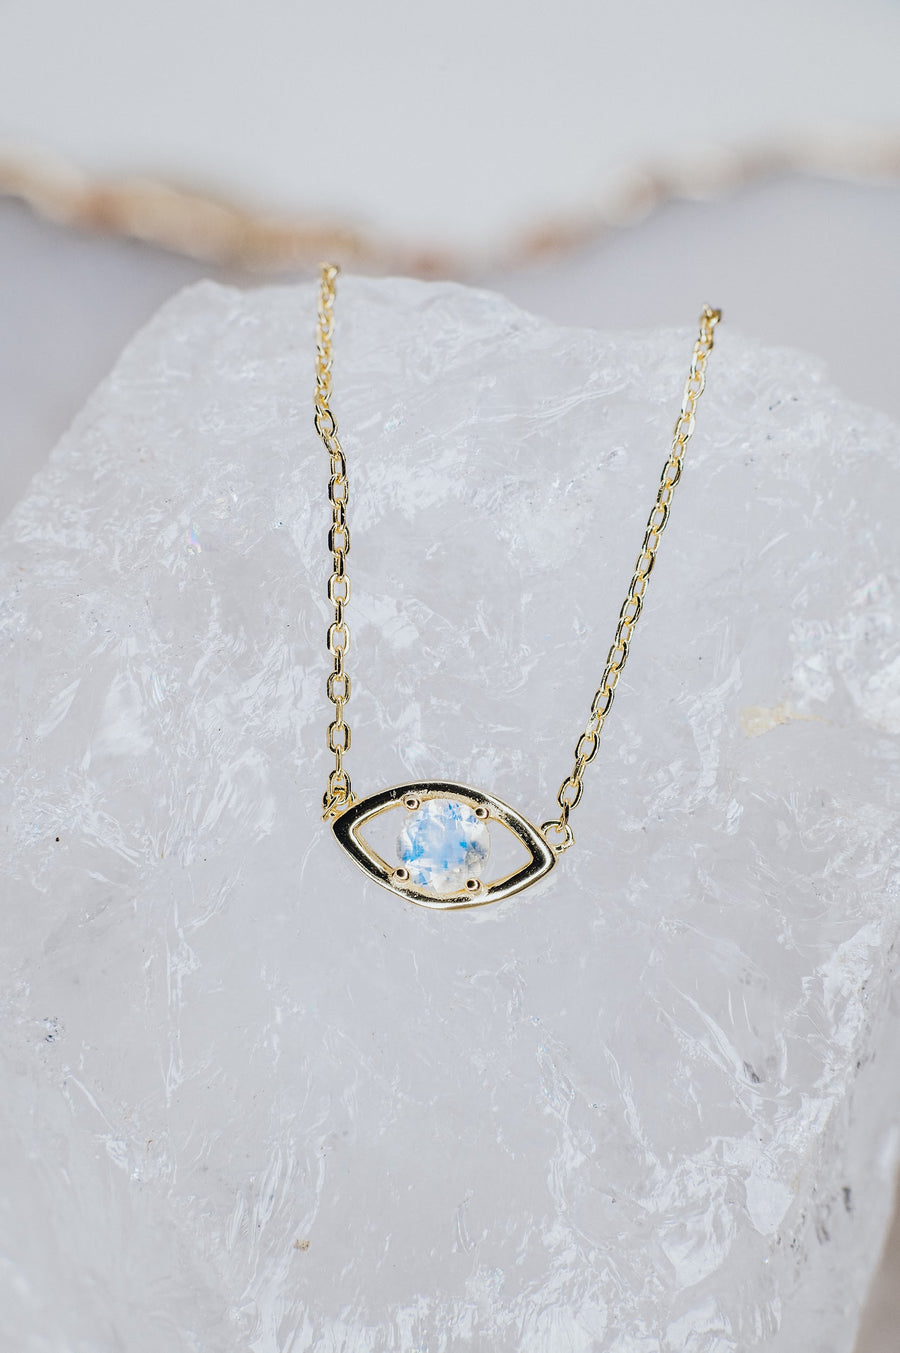 Moonstone eye necklace gold plated